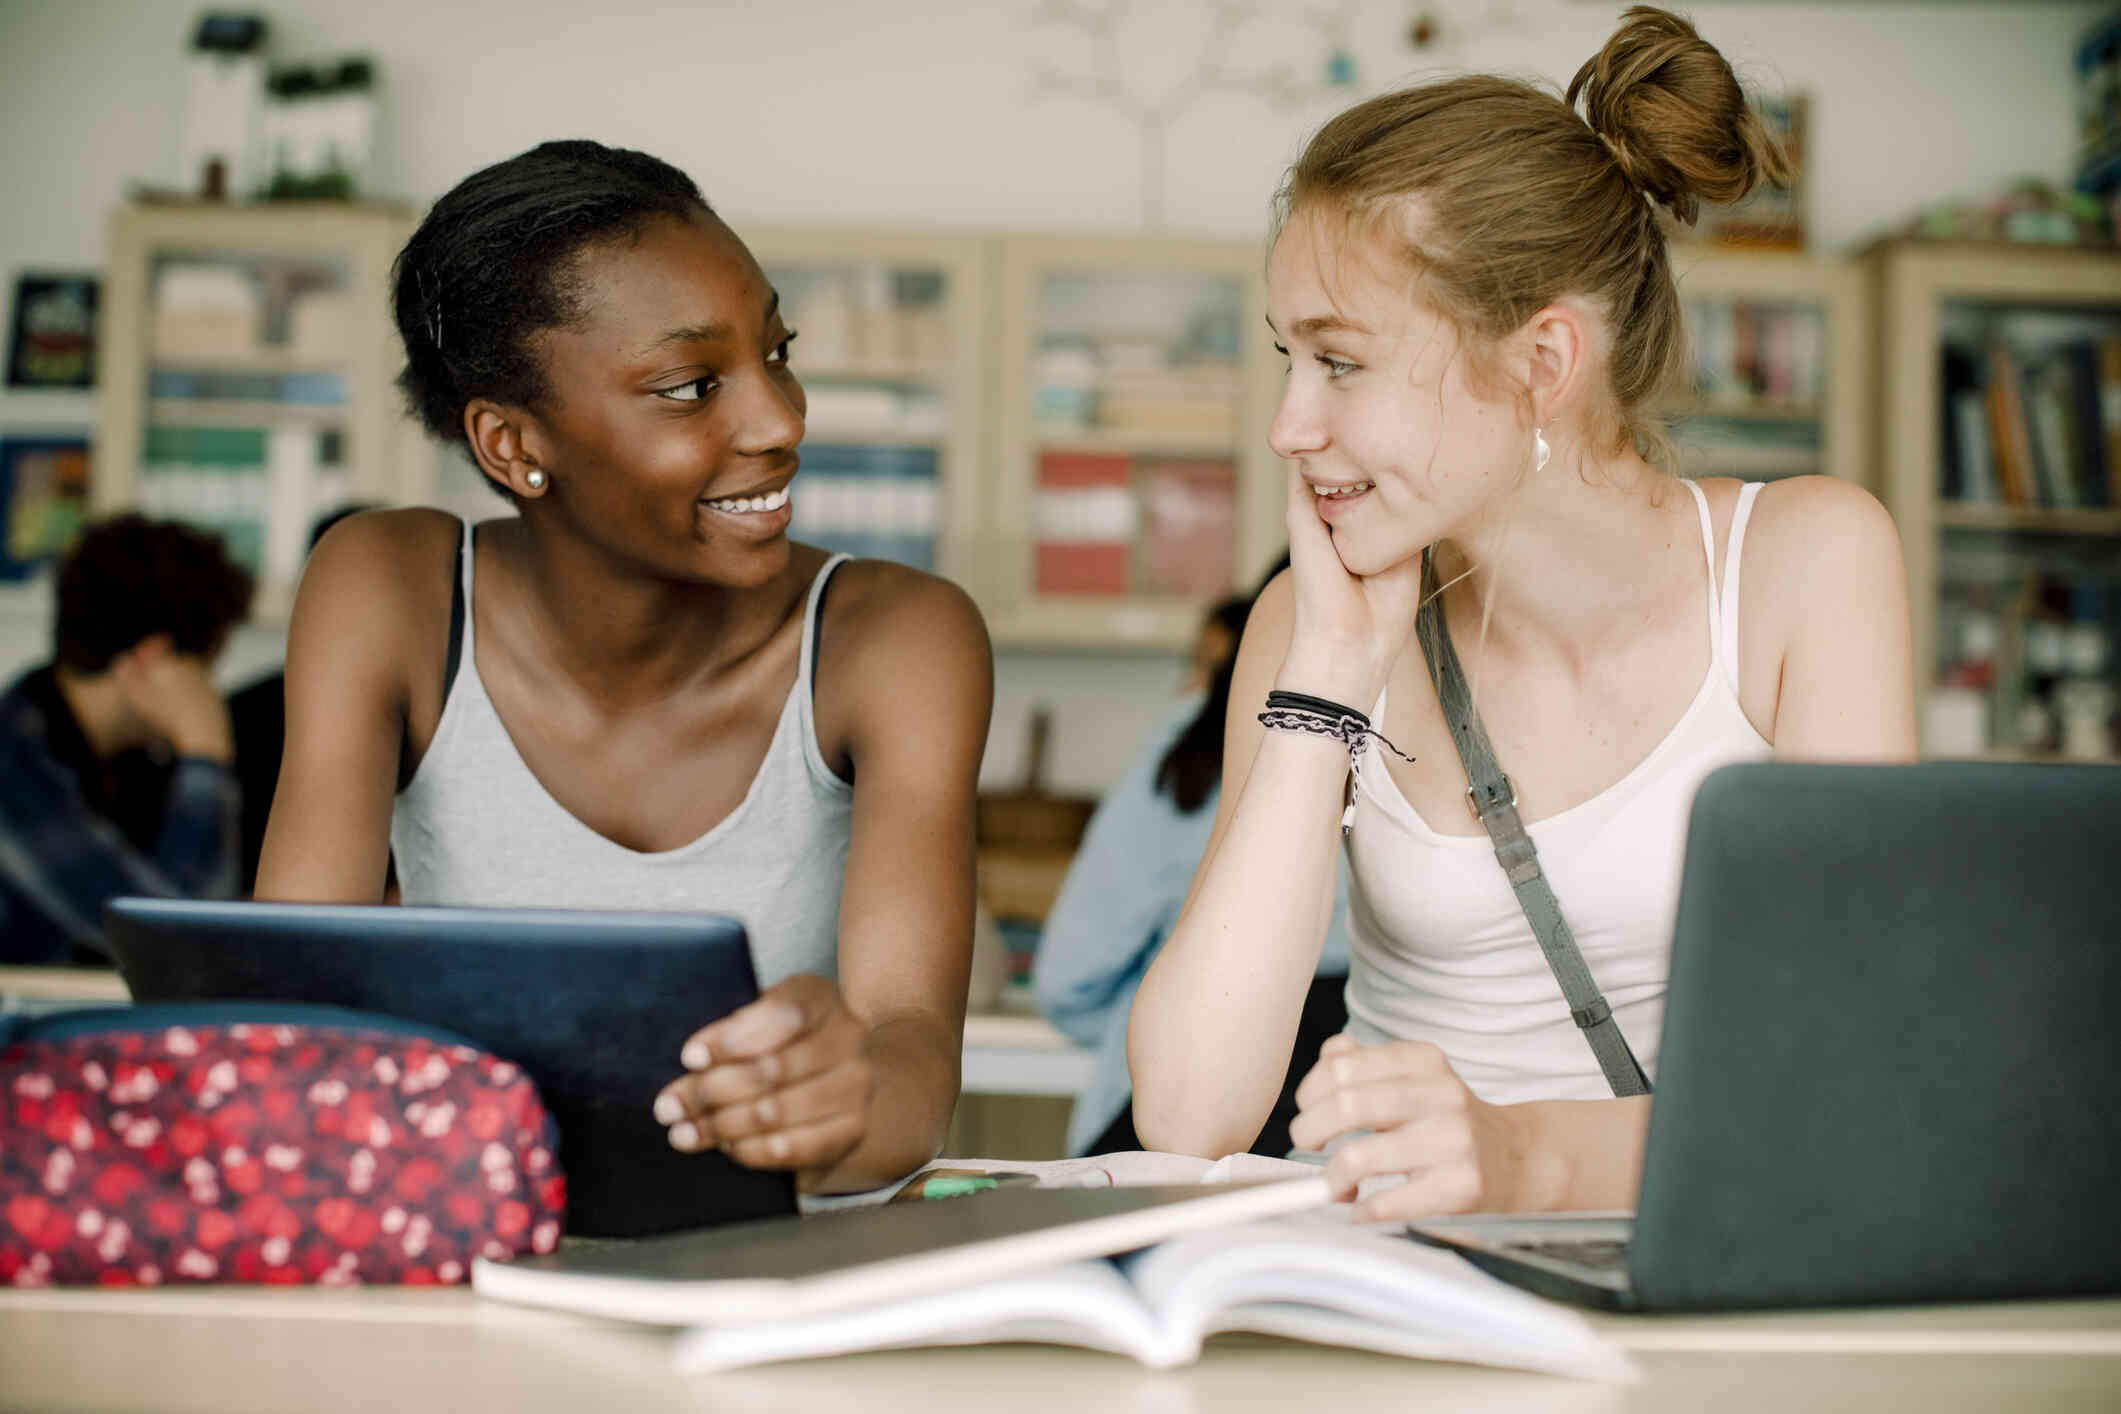 Two teen girls sit side by side at a table with notebooks and thair laptops while they smile at one another.